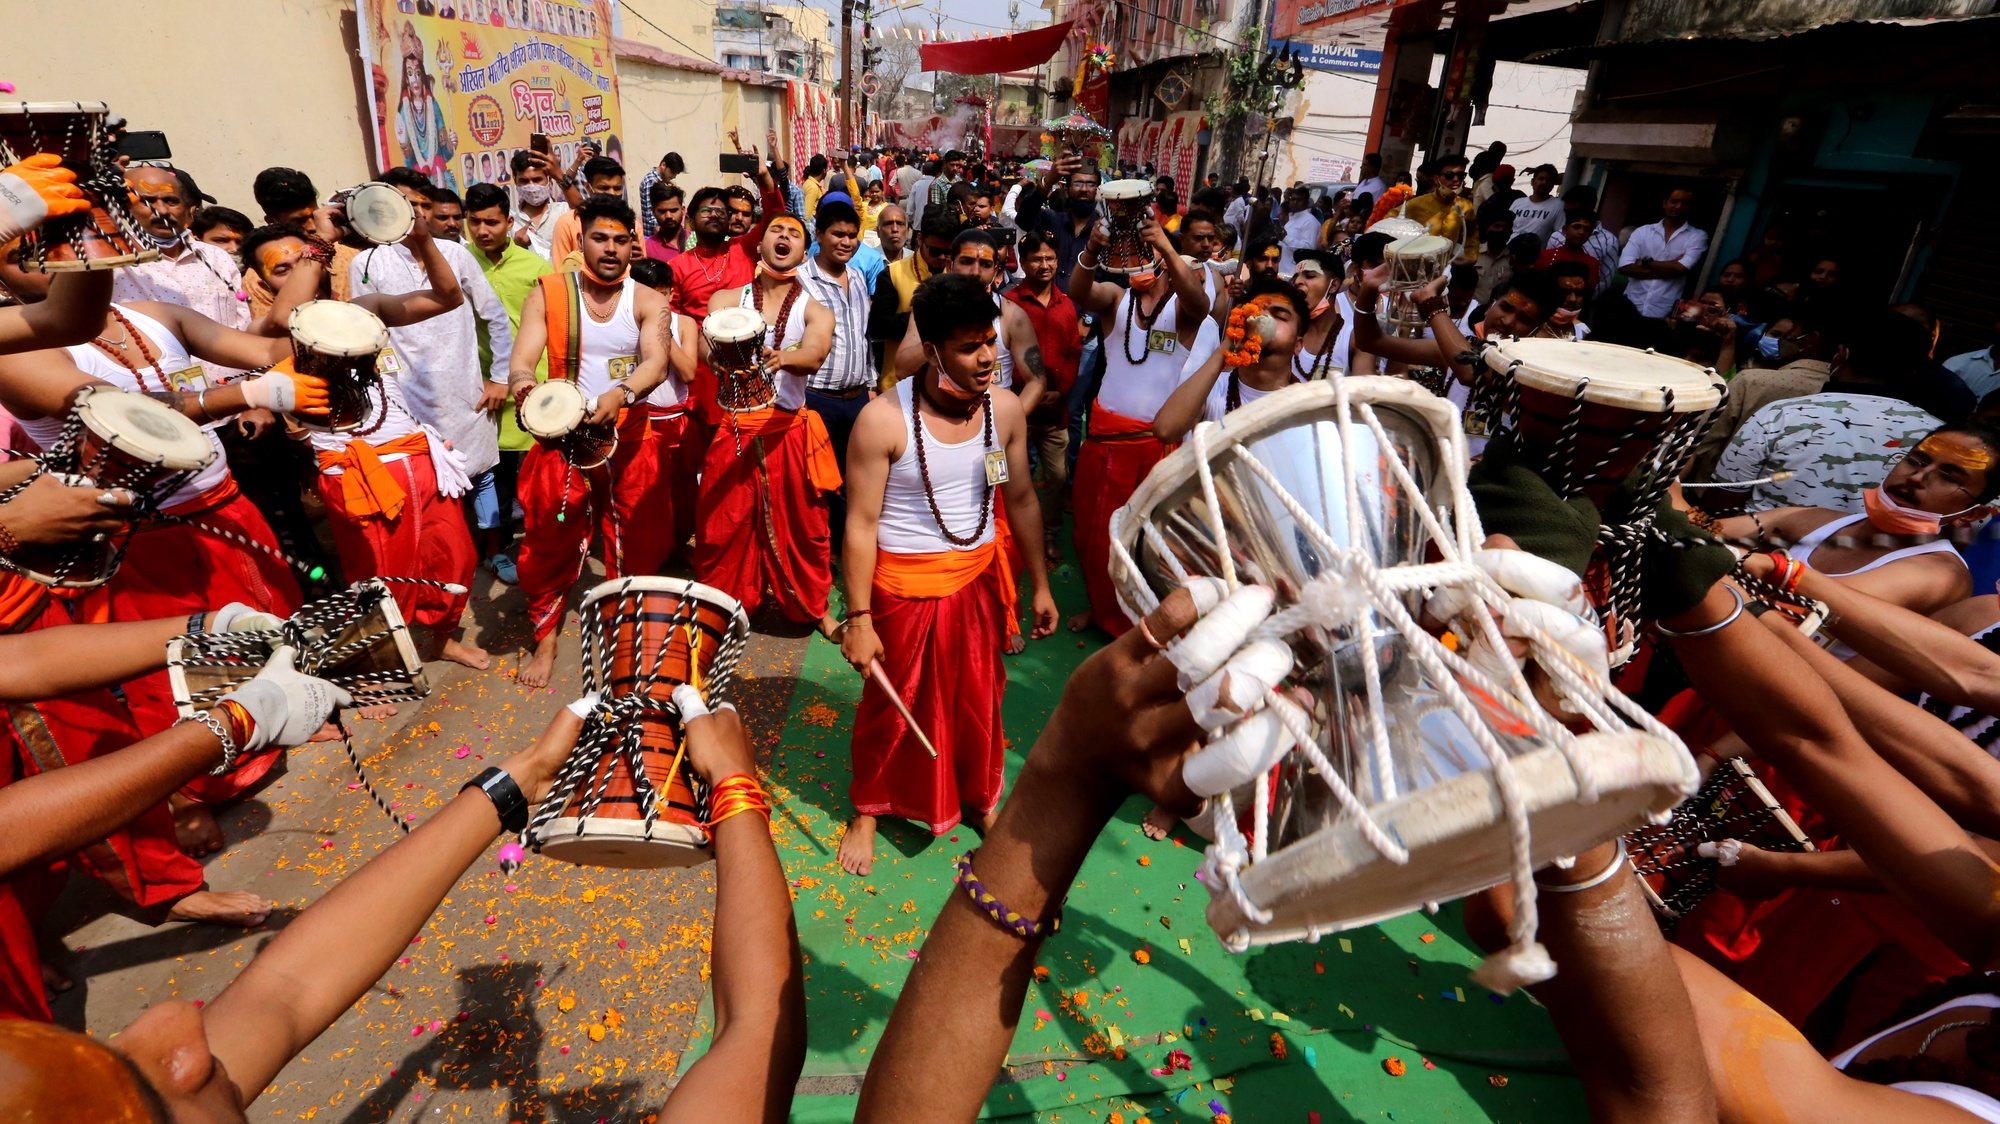 epa09067041 Devotees play musical instruments during the Shiv Barat or Shiv wedding procession as part of the Maha Shivratri festival in Bhopal, India, 11 March 2021. Maha Shivaratri is celebrated by Hindus in honor of Lord Shiva with ritual bathing of Shivalingams and prayers. Unmarried women observe fast from dawn to dusk and pray to Lord Shiva to give them a good spouse. According to one of the most popular legends, Shivaratri is the wedding day of Lord Shiva and Parvati.  EPA/SANJEEV GUPTA